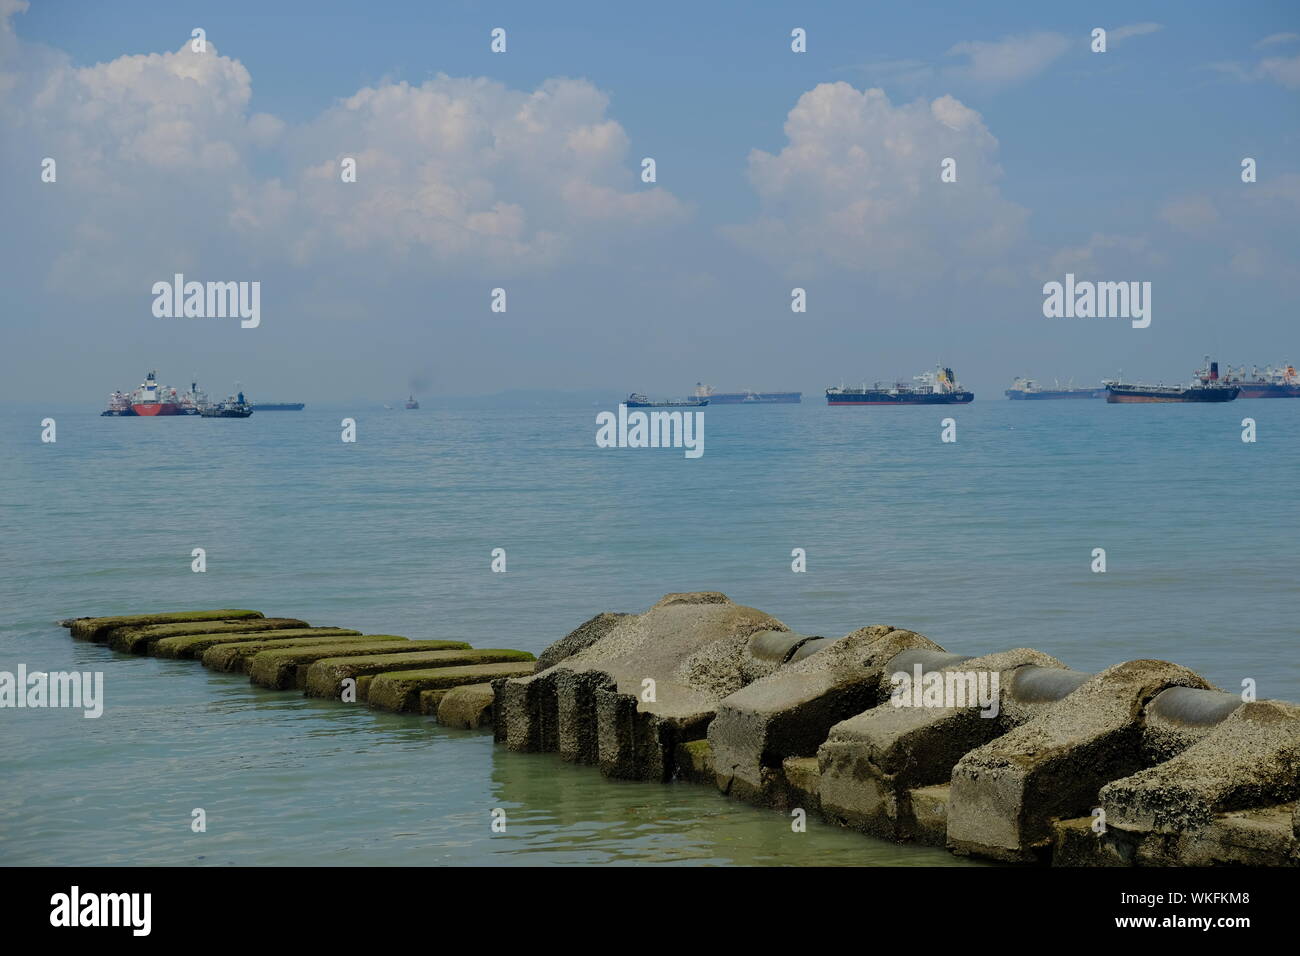 The Singapore Strait view from Singapore Stock Photo